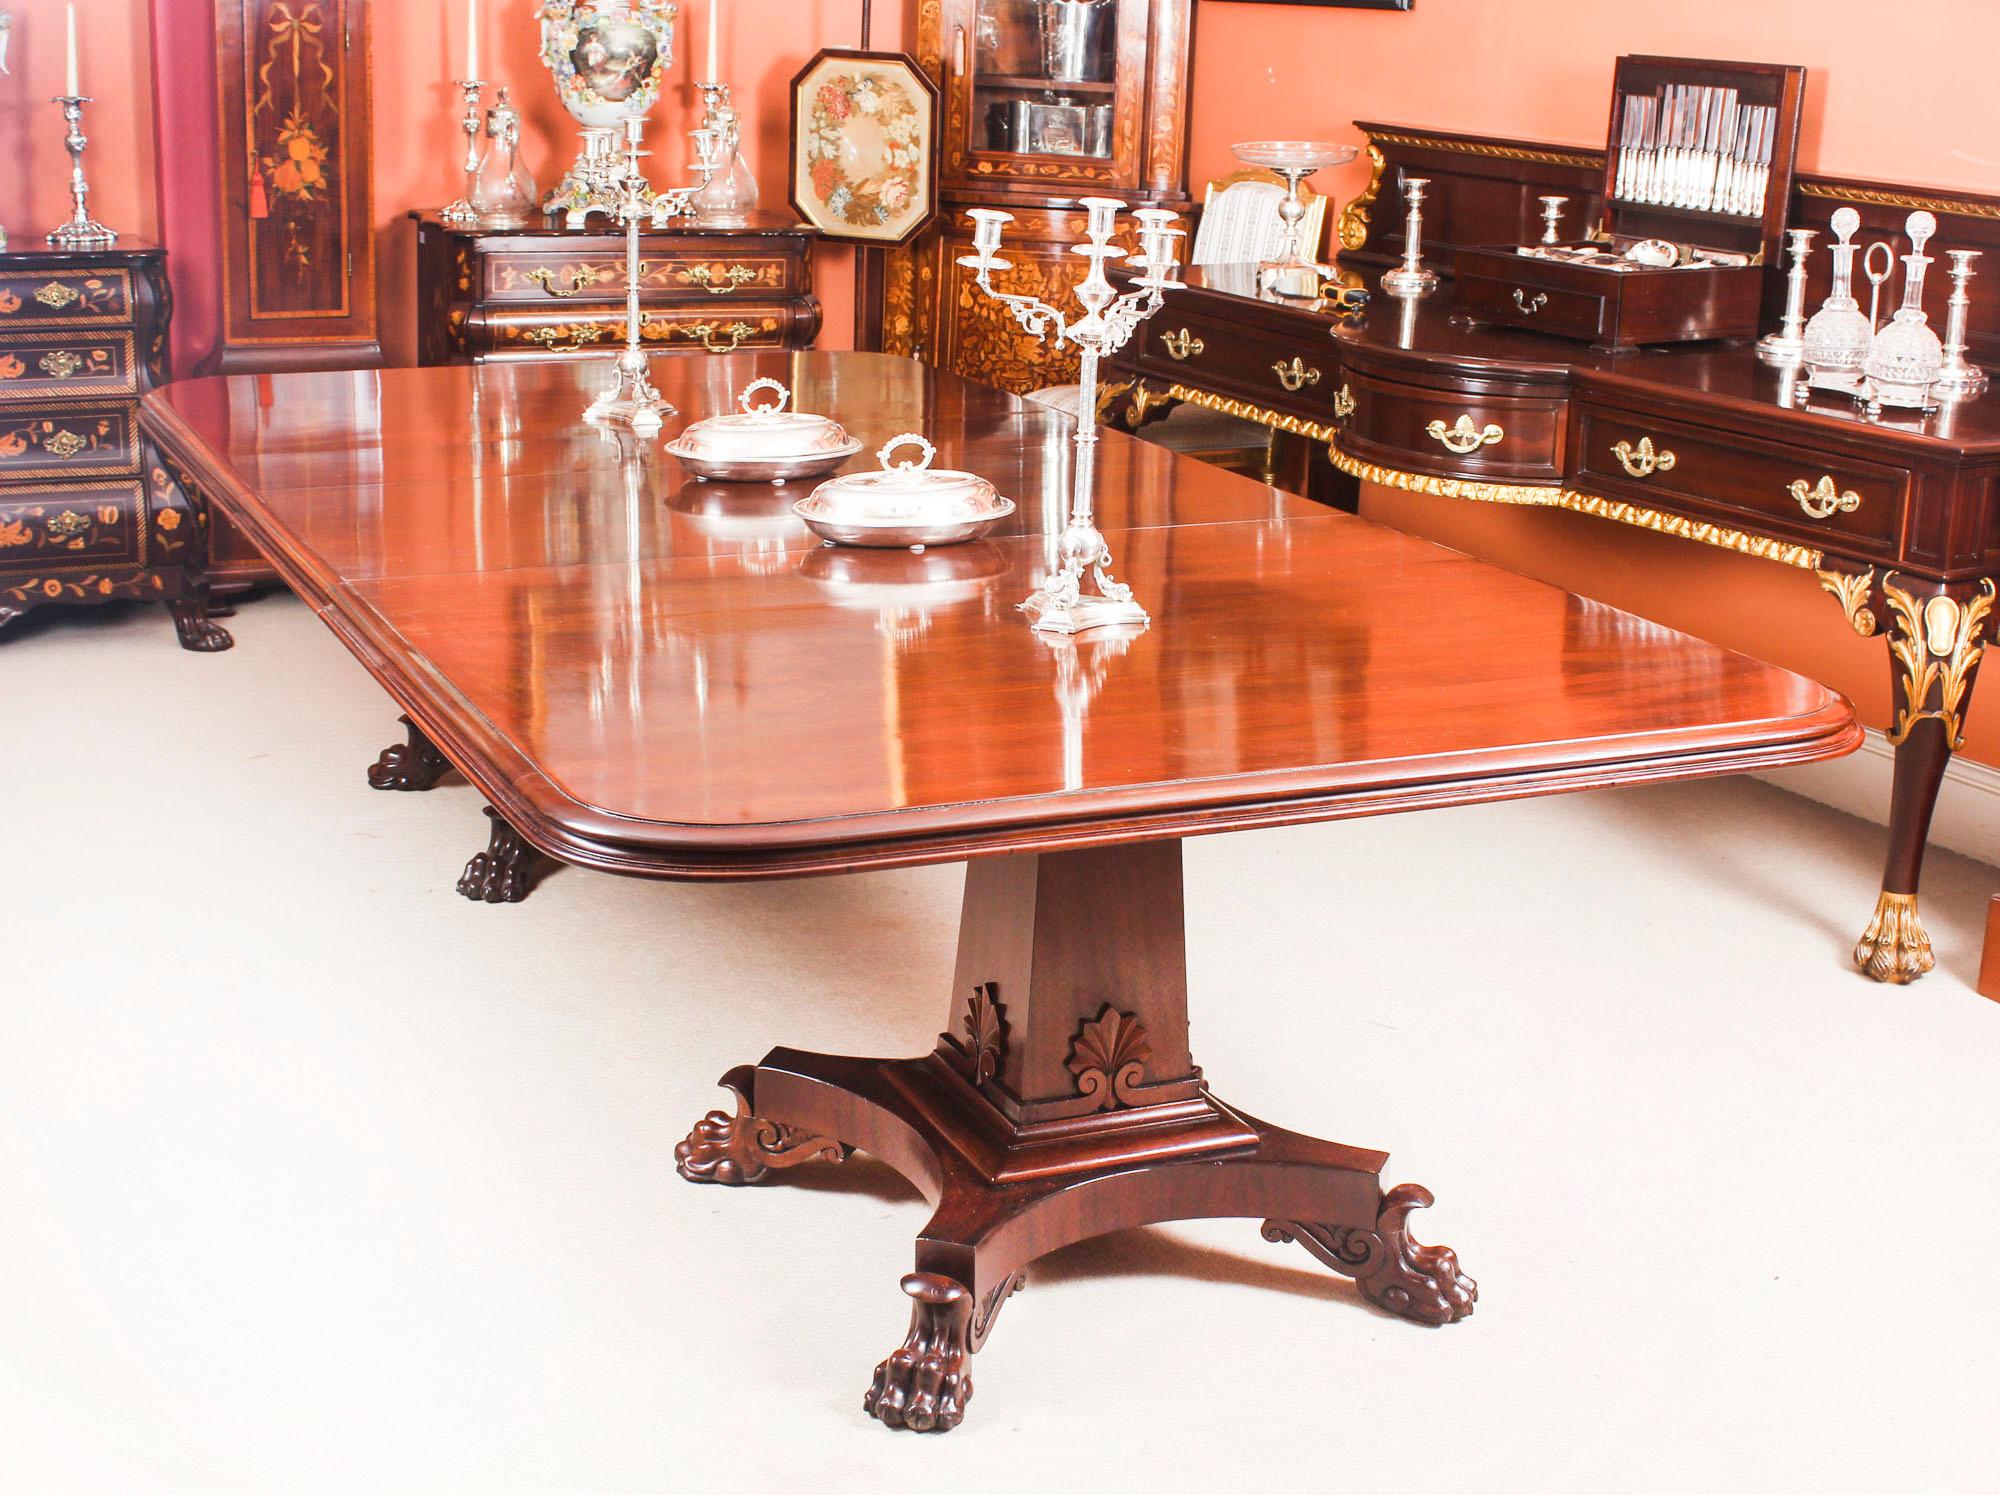 This is a beautiful antique George III flame mahogany btwin pedestal extending dining table, circa 1810 in date.

This amazing table can sit ten people in comfort and will stretch to 12 when two people are seated at each end. It has been